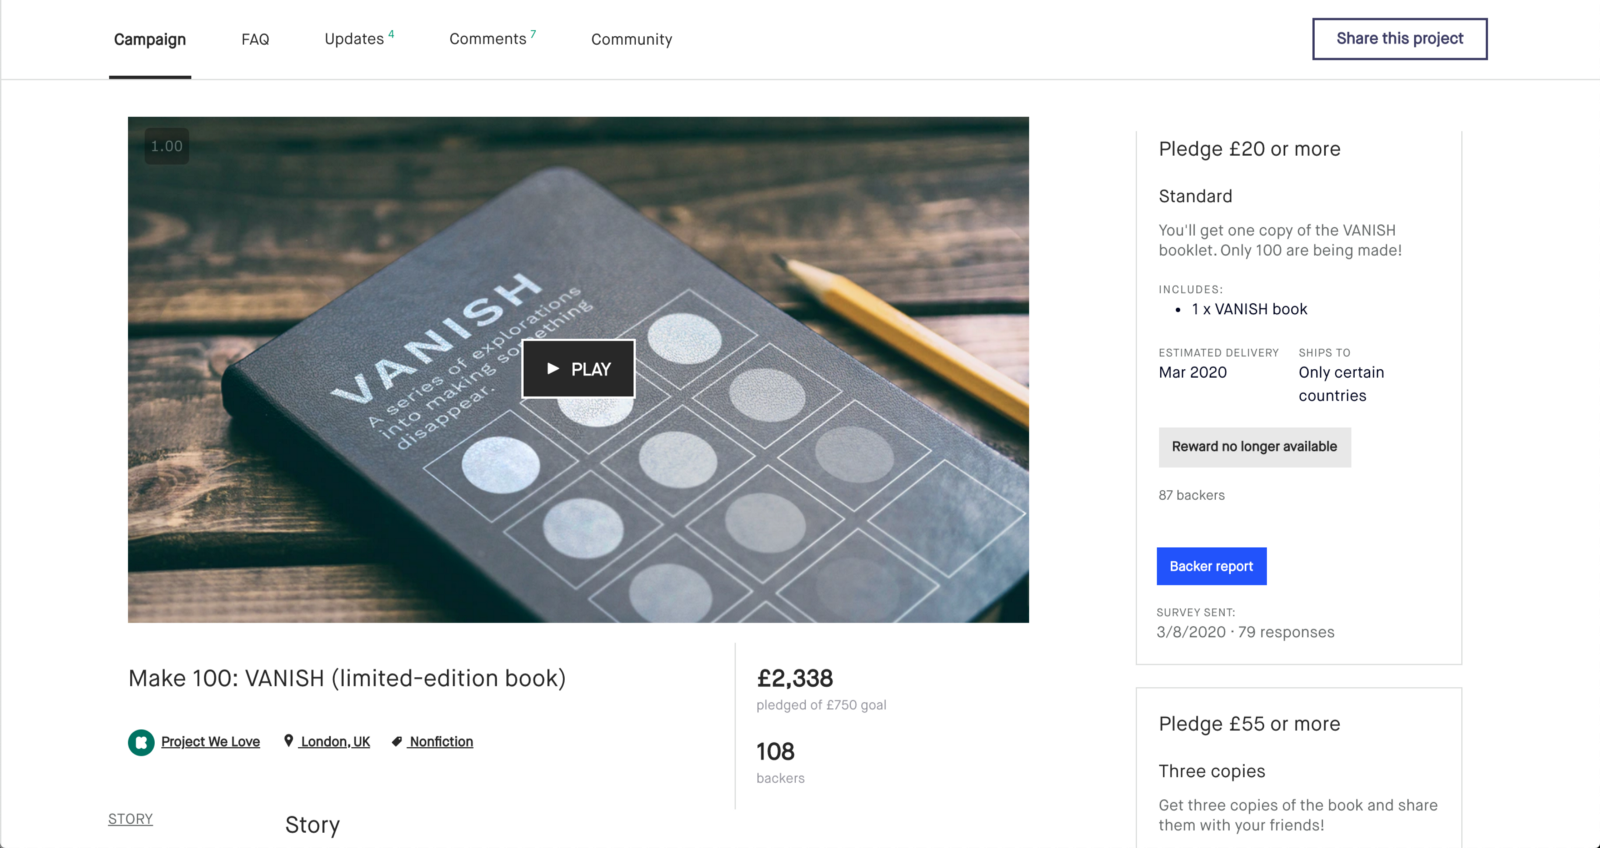 A screenshot of the Kickstarter page for the project